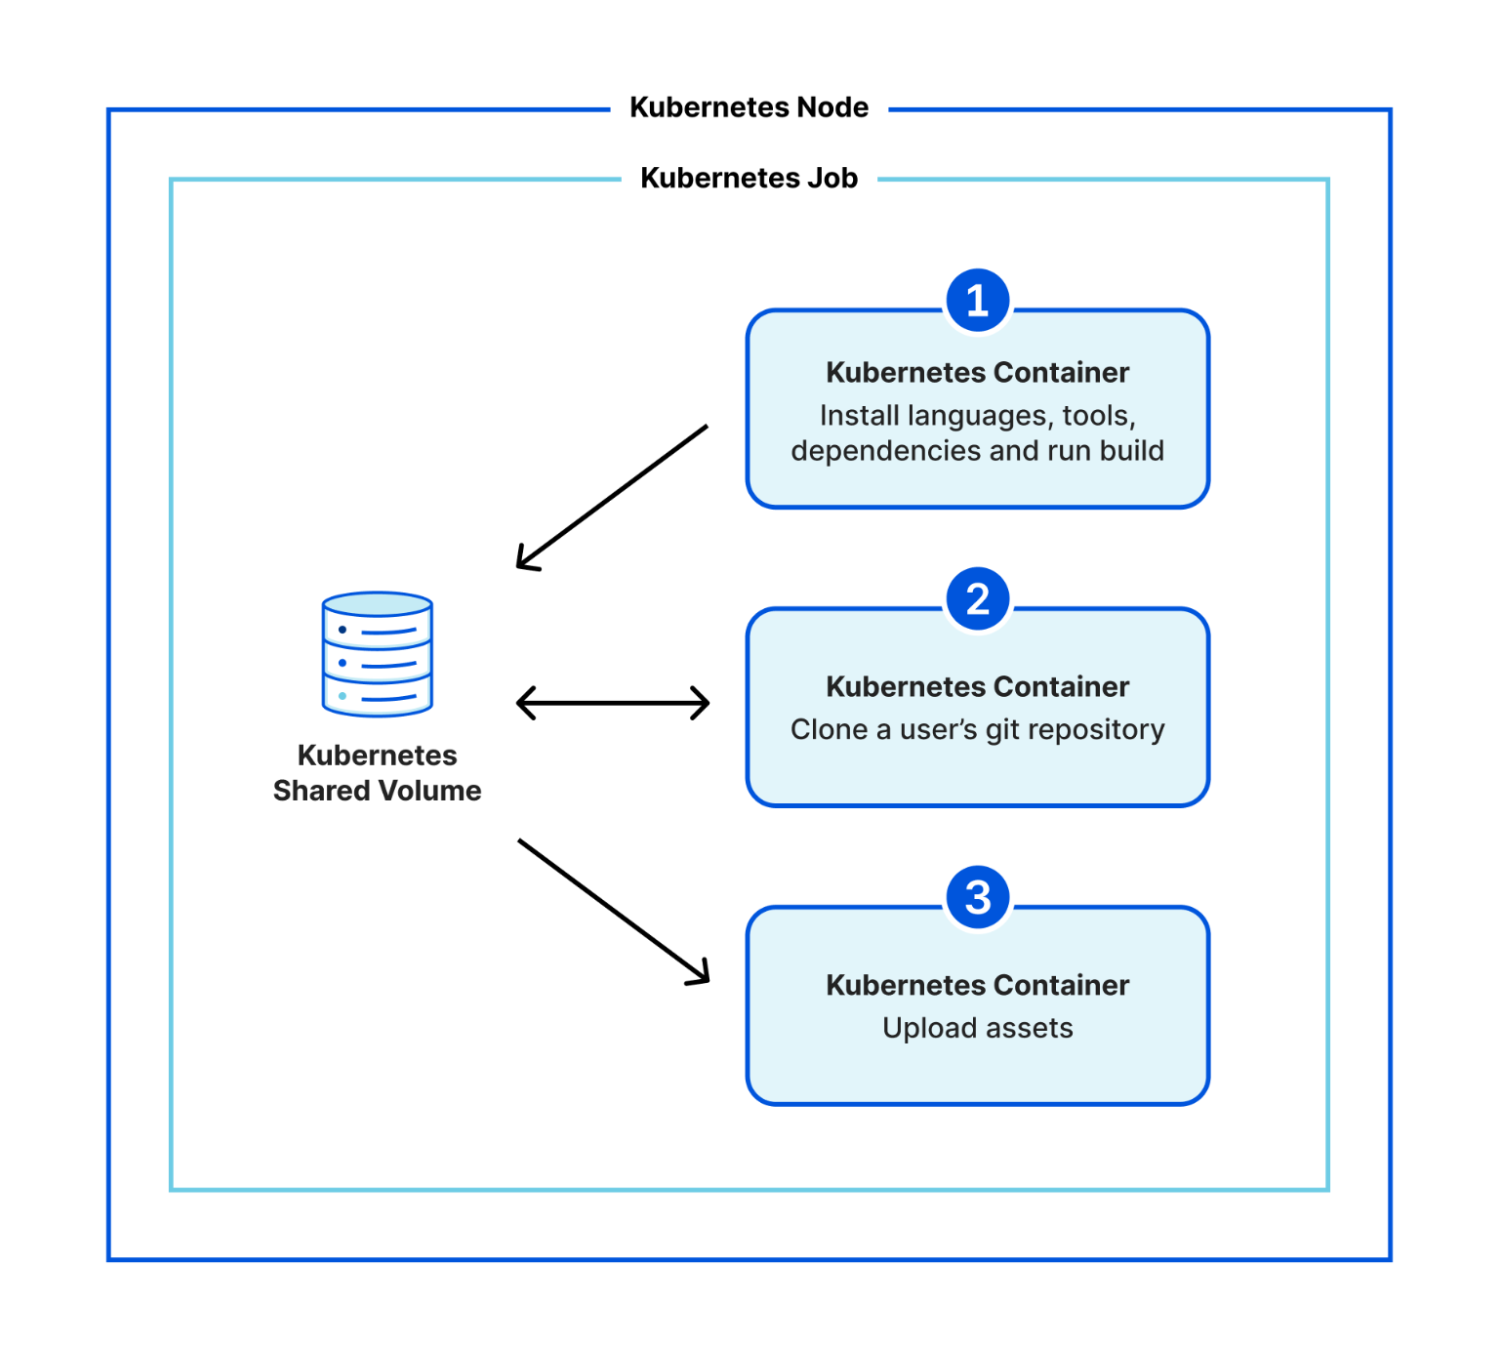 A diagram of three sequential Kubernetes containers which all connect to a Kubernetes Shared Volume. They belong to a Kubernetes job which itself is run within a Kubernetes Node. The first container clones a user's git repository; the second installs languages, tools, dependencies and runs the build; and the third uploads the assets.